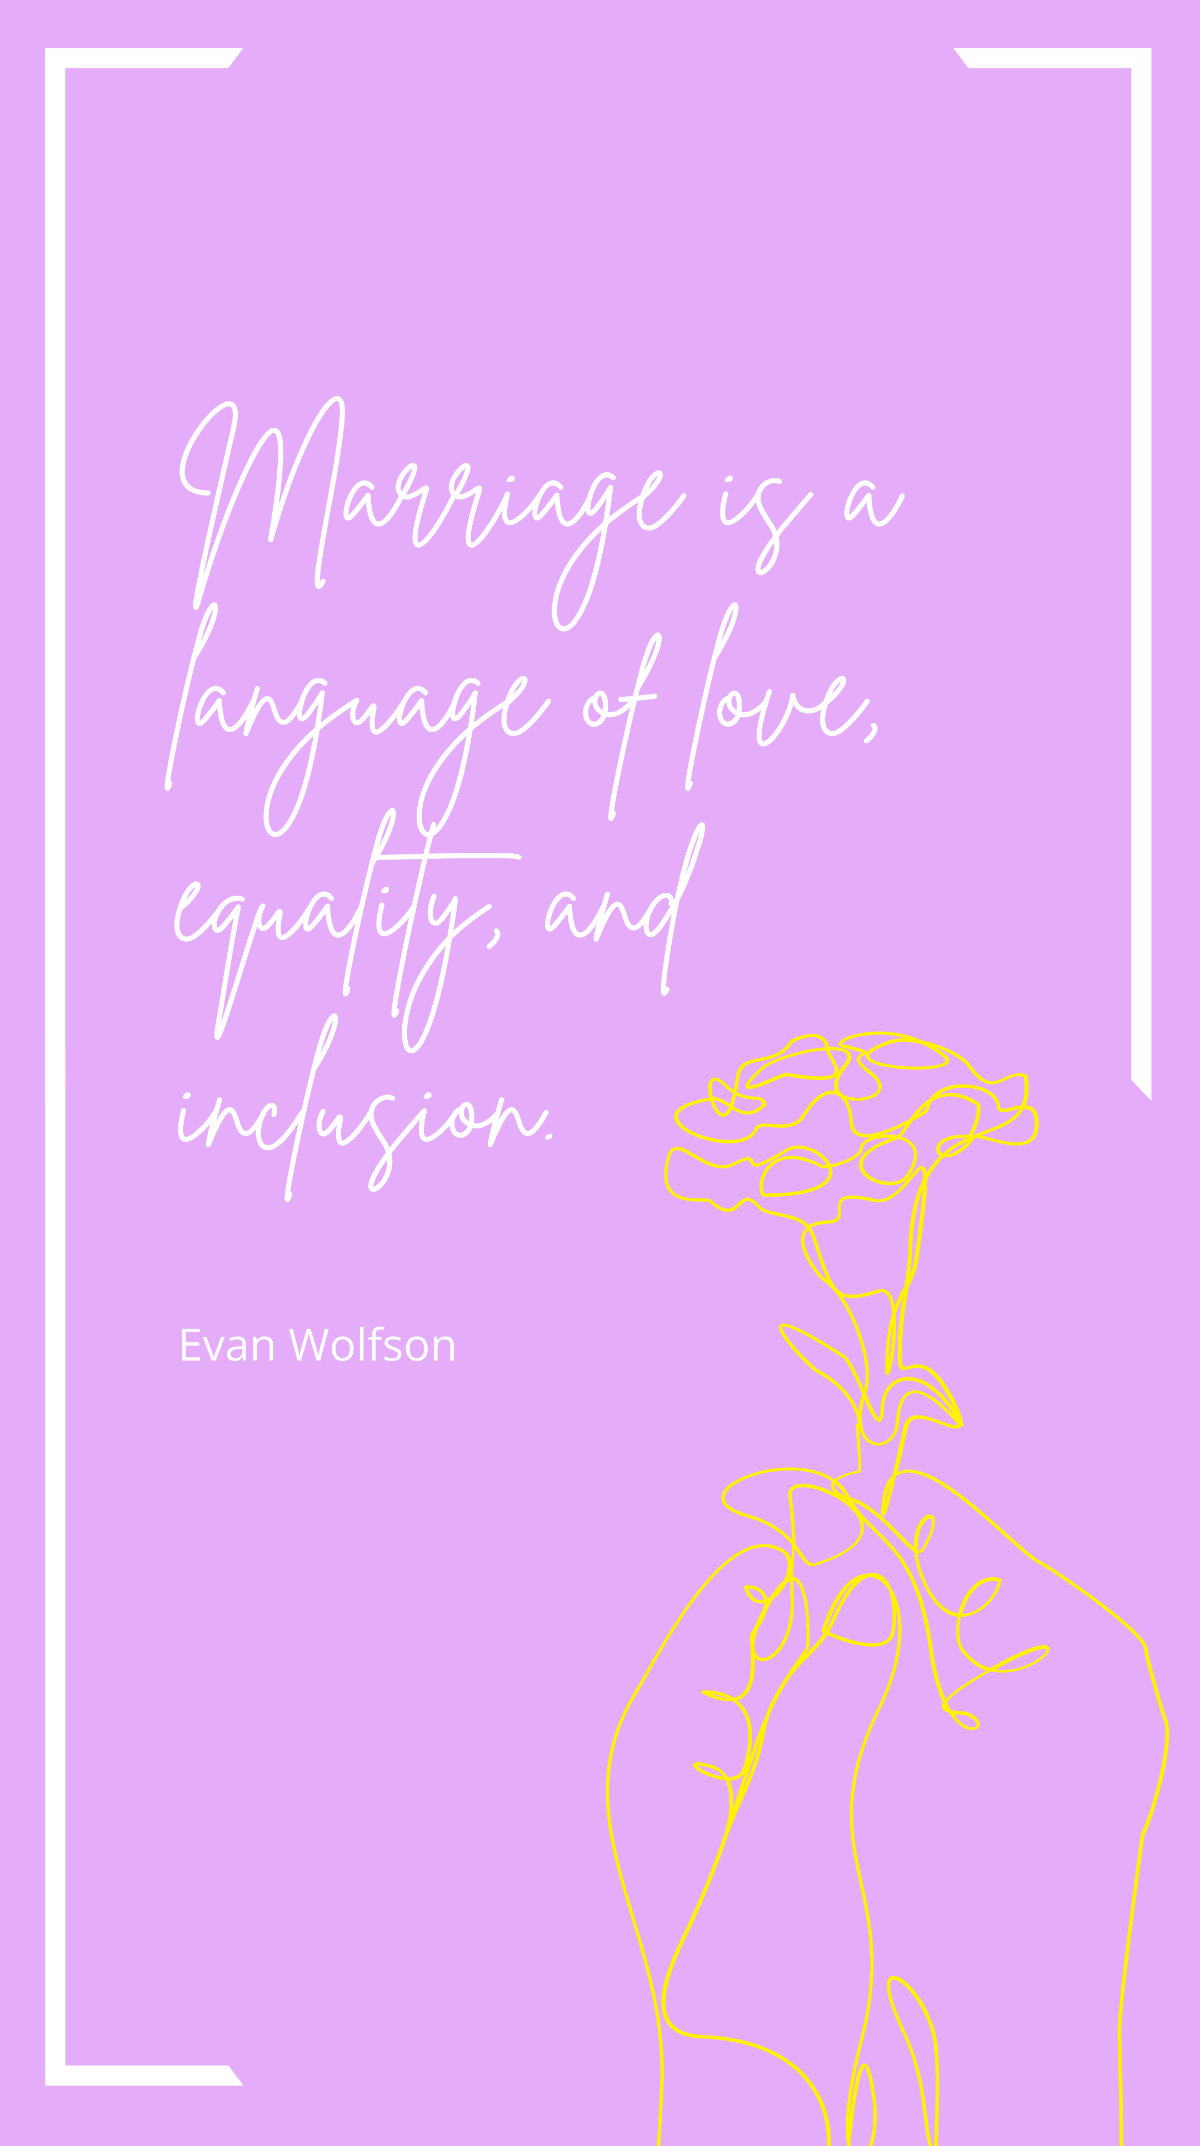 Evan Wolfson - Marriage is a language of love, equality, and inclusion. Template